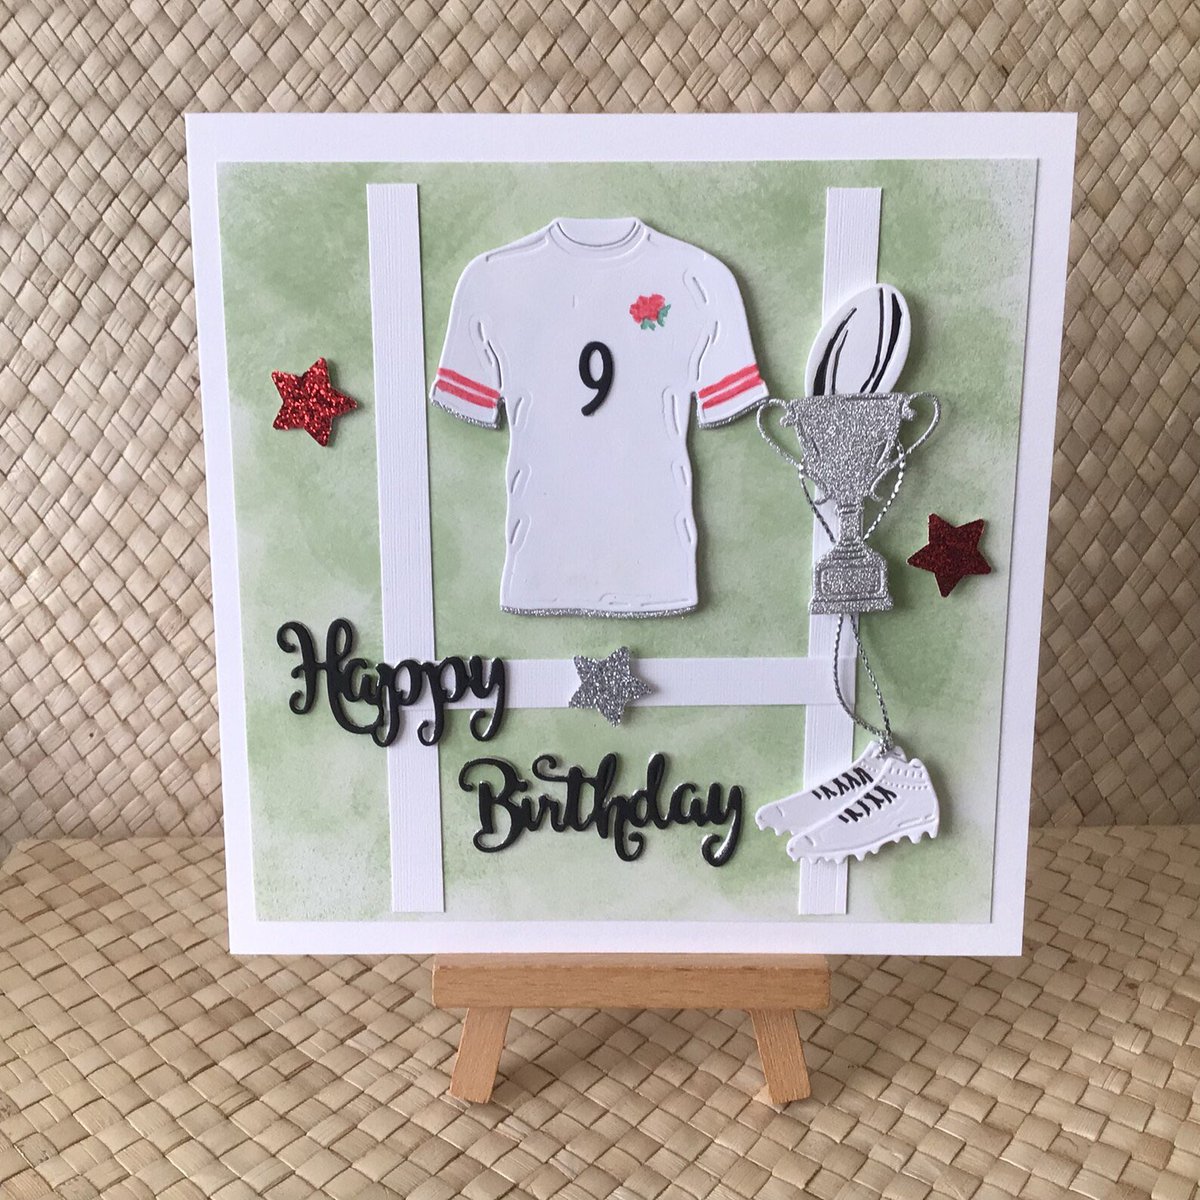 Customised handmade cards for #football and #rugby fans 🏆Choose your team colours!

etsy.com/uk/shop/AllaCa…

#CraftHour #craftmakersuk #supporthandmade #LincsConnect